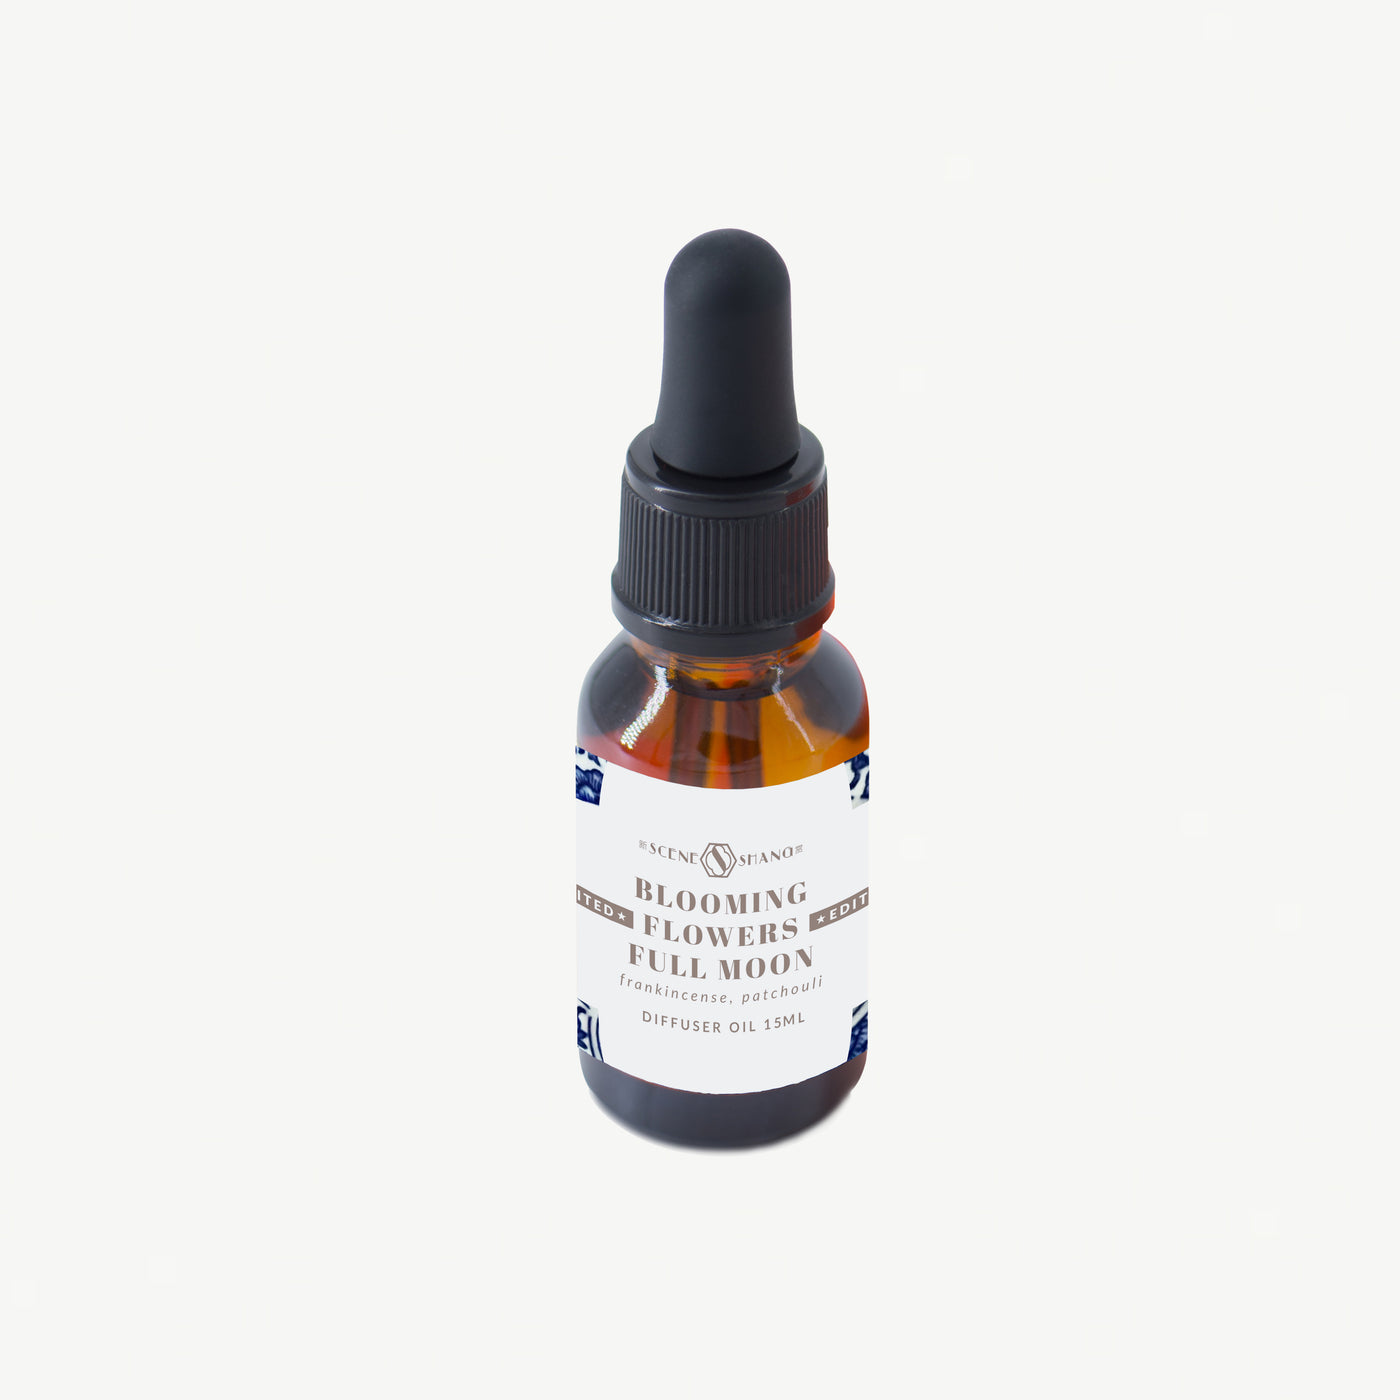 [LIMITED EDITION] BLOOMING FLOWERS FULL MOON Diffuser Oil (Frankincense, Patchouli)